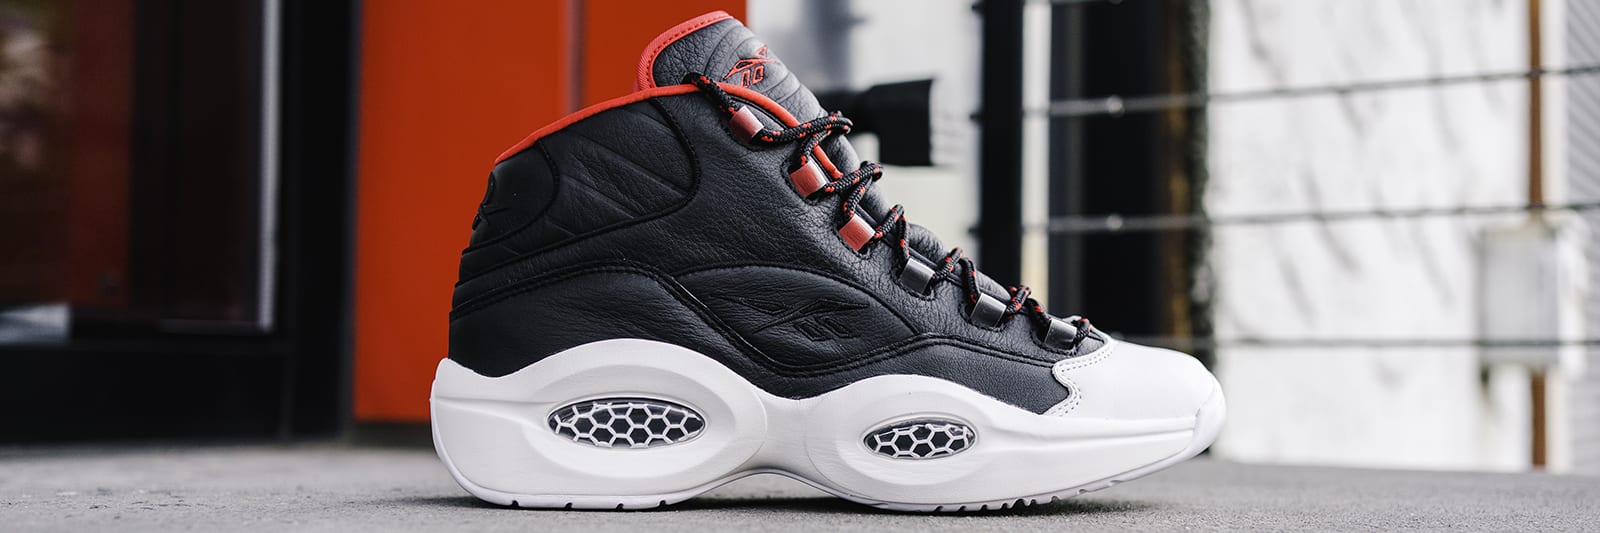 reebok question new releases